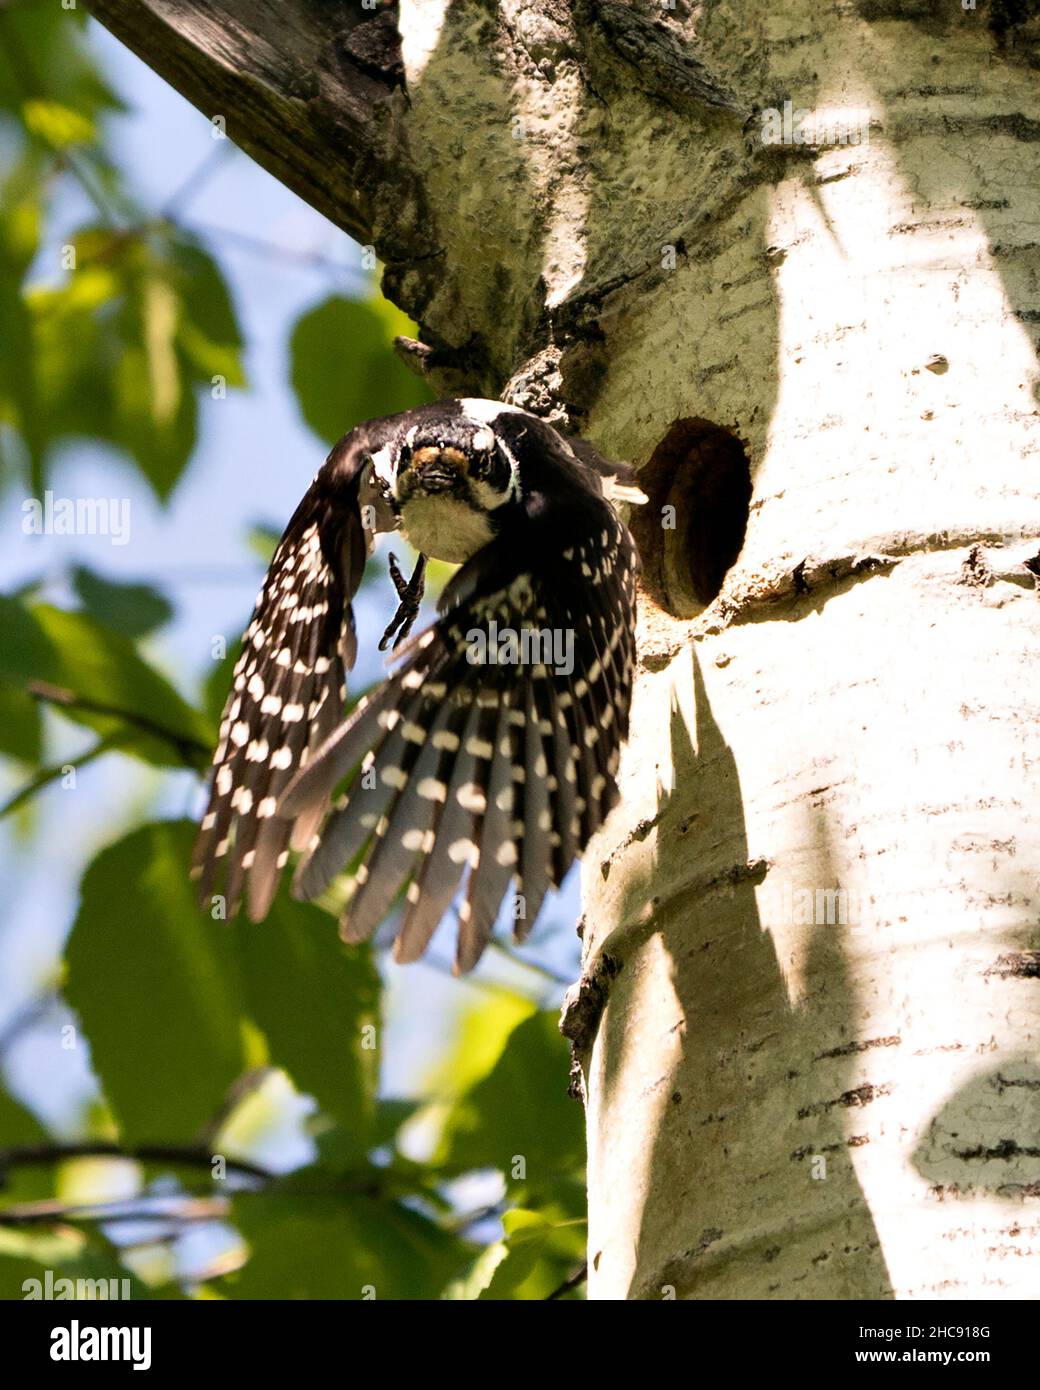 Woodpecker flying out of its nest house with spread wings with blur background in its environment and habitat surrounding. Woodpecker Hairy Image. Pic Stock Photo